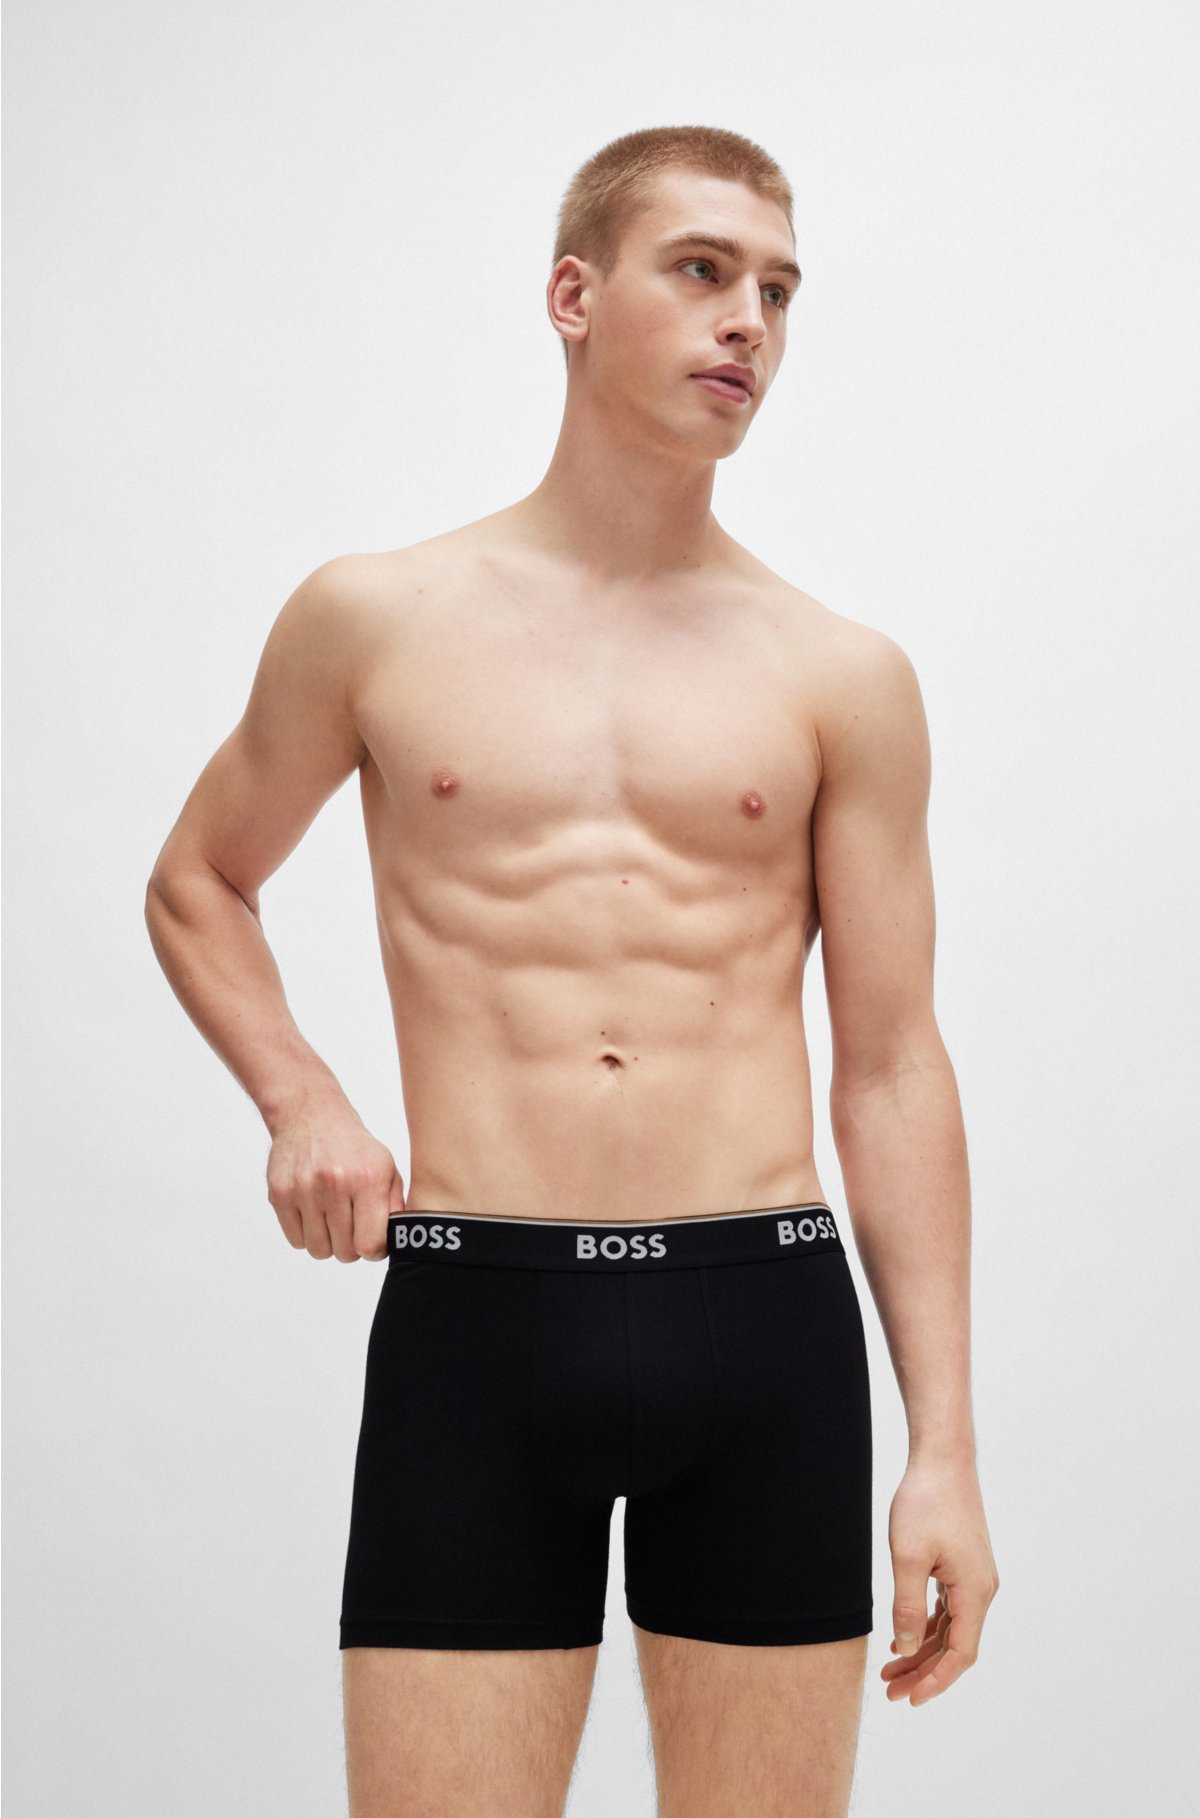 Three-pack of stretch-cotton boxer briefs with logo waistbands, Black